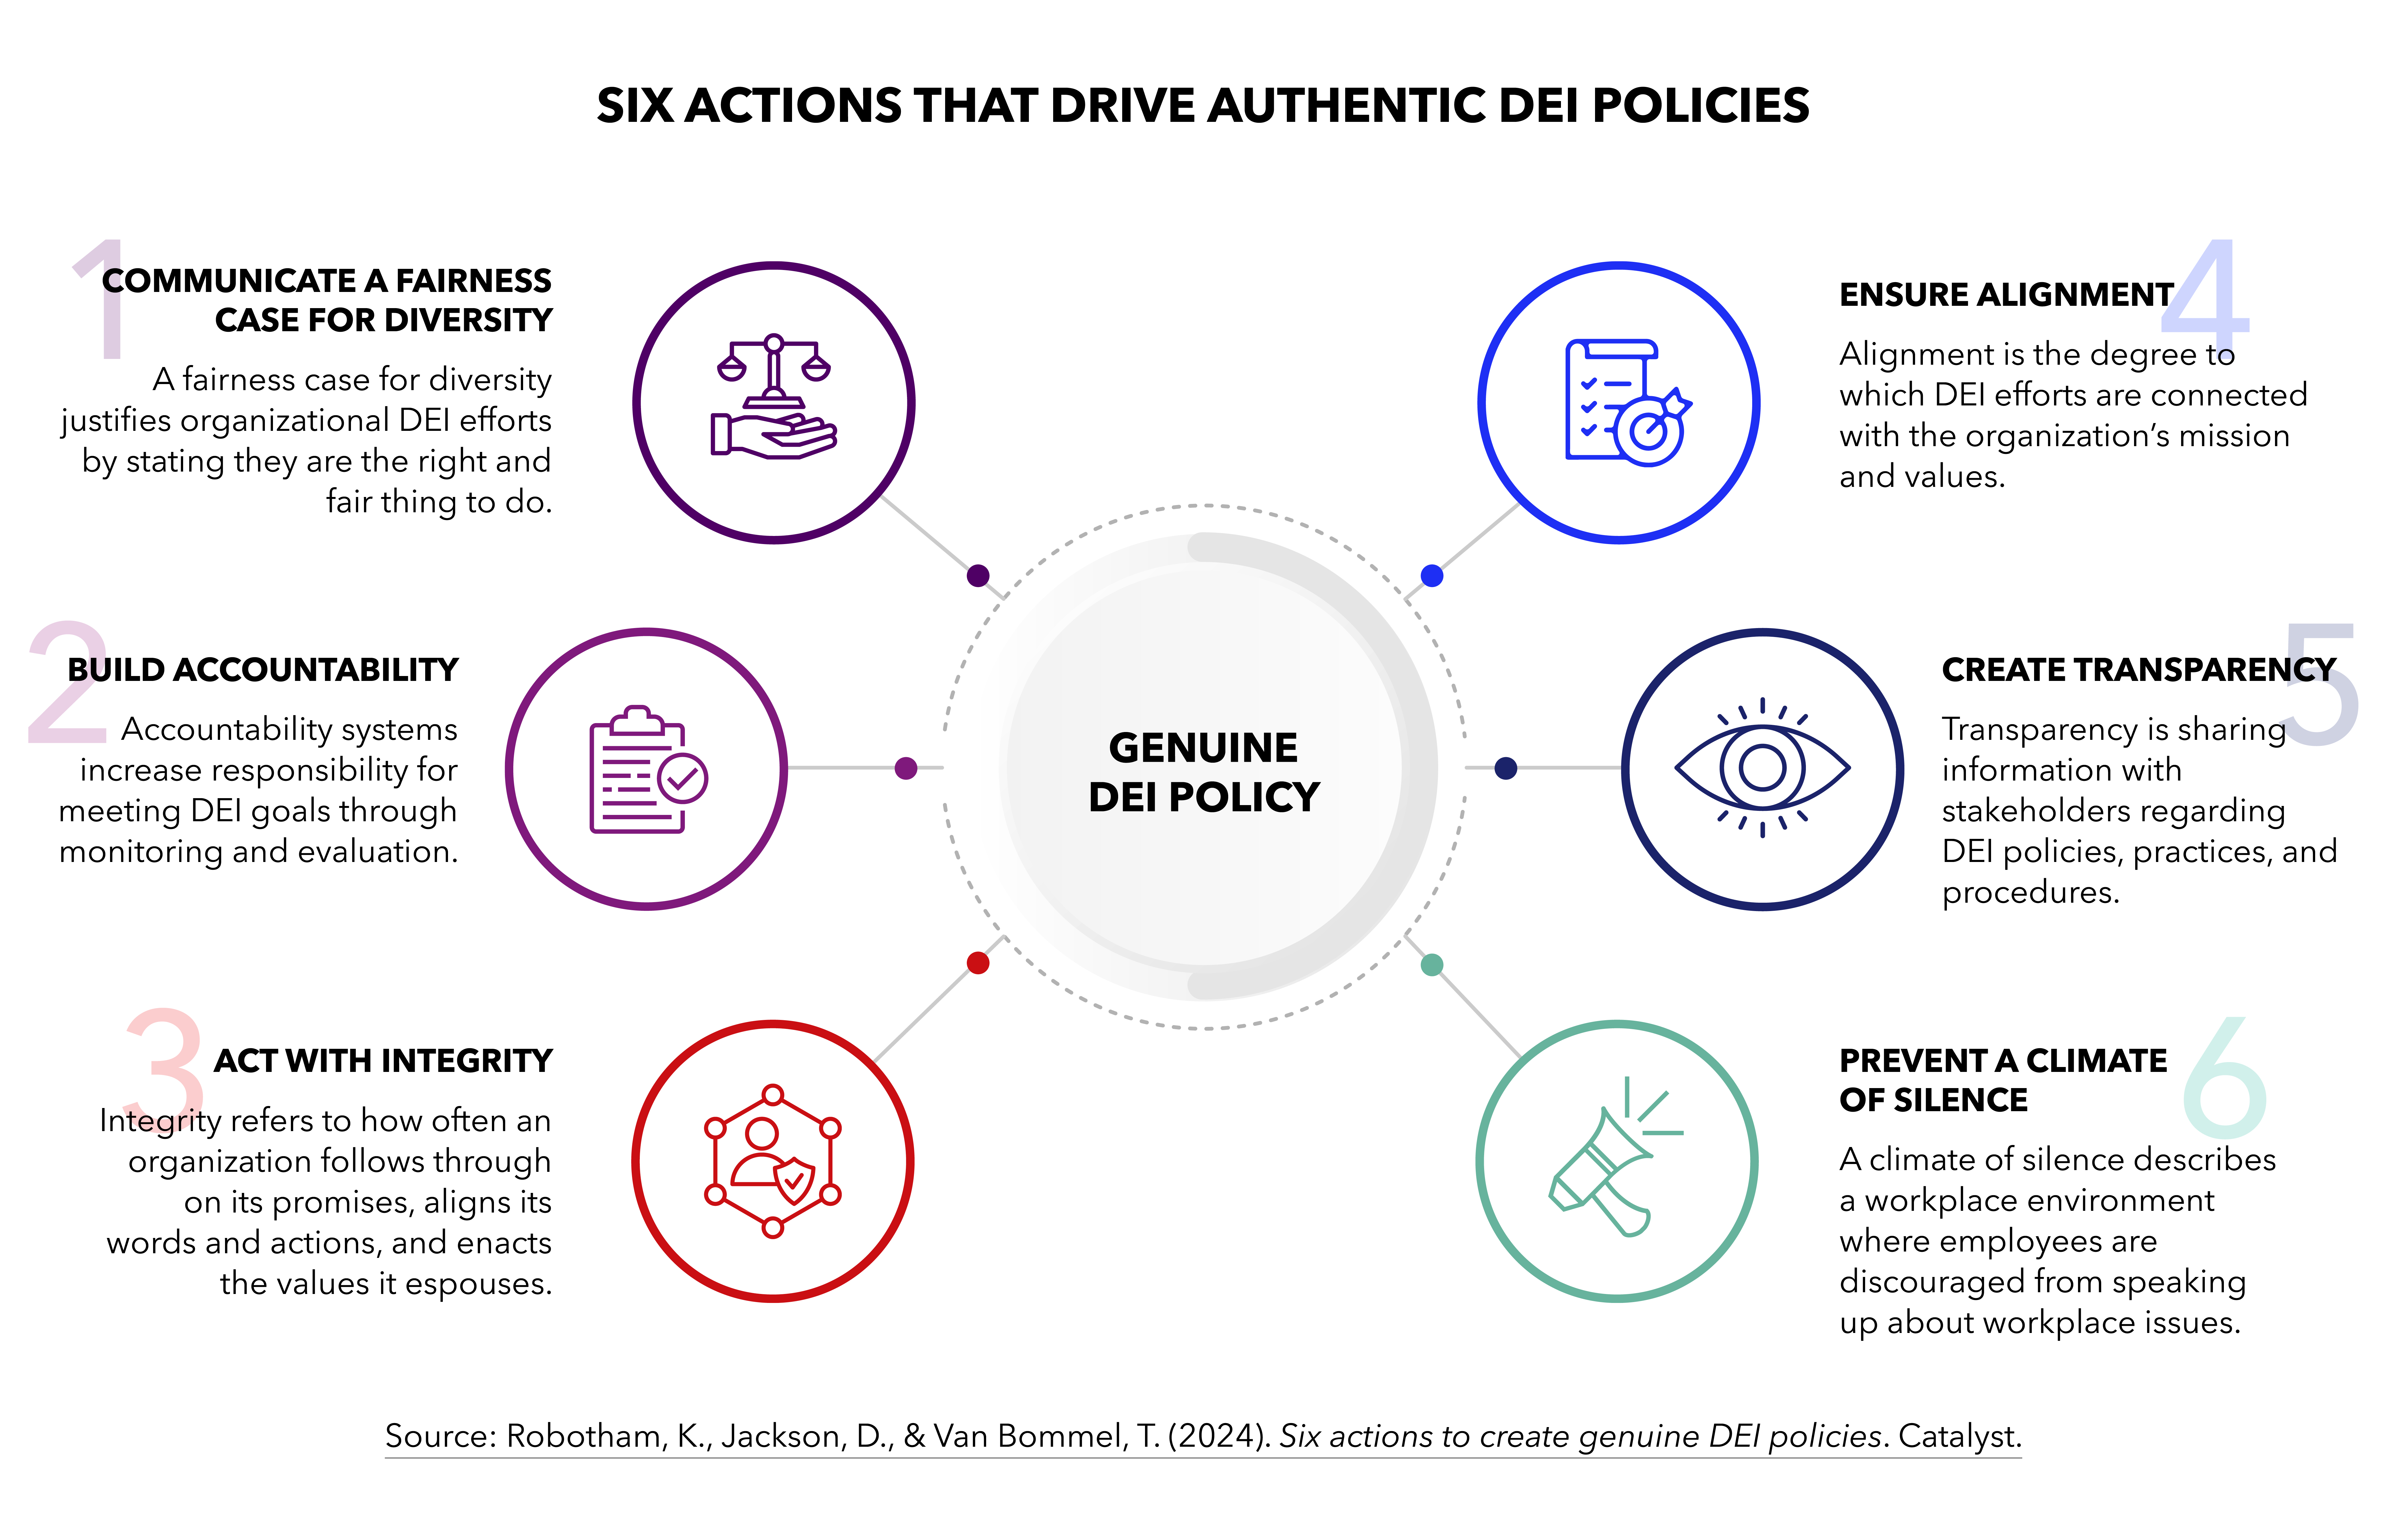 Diagram of the 6 actions that drive authentic DEI policies.